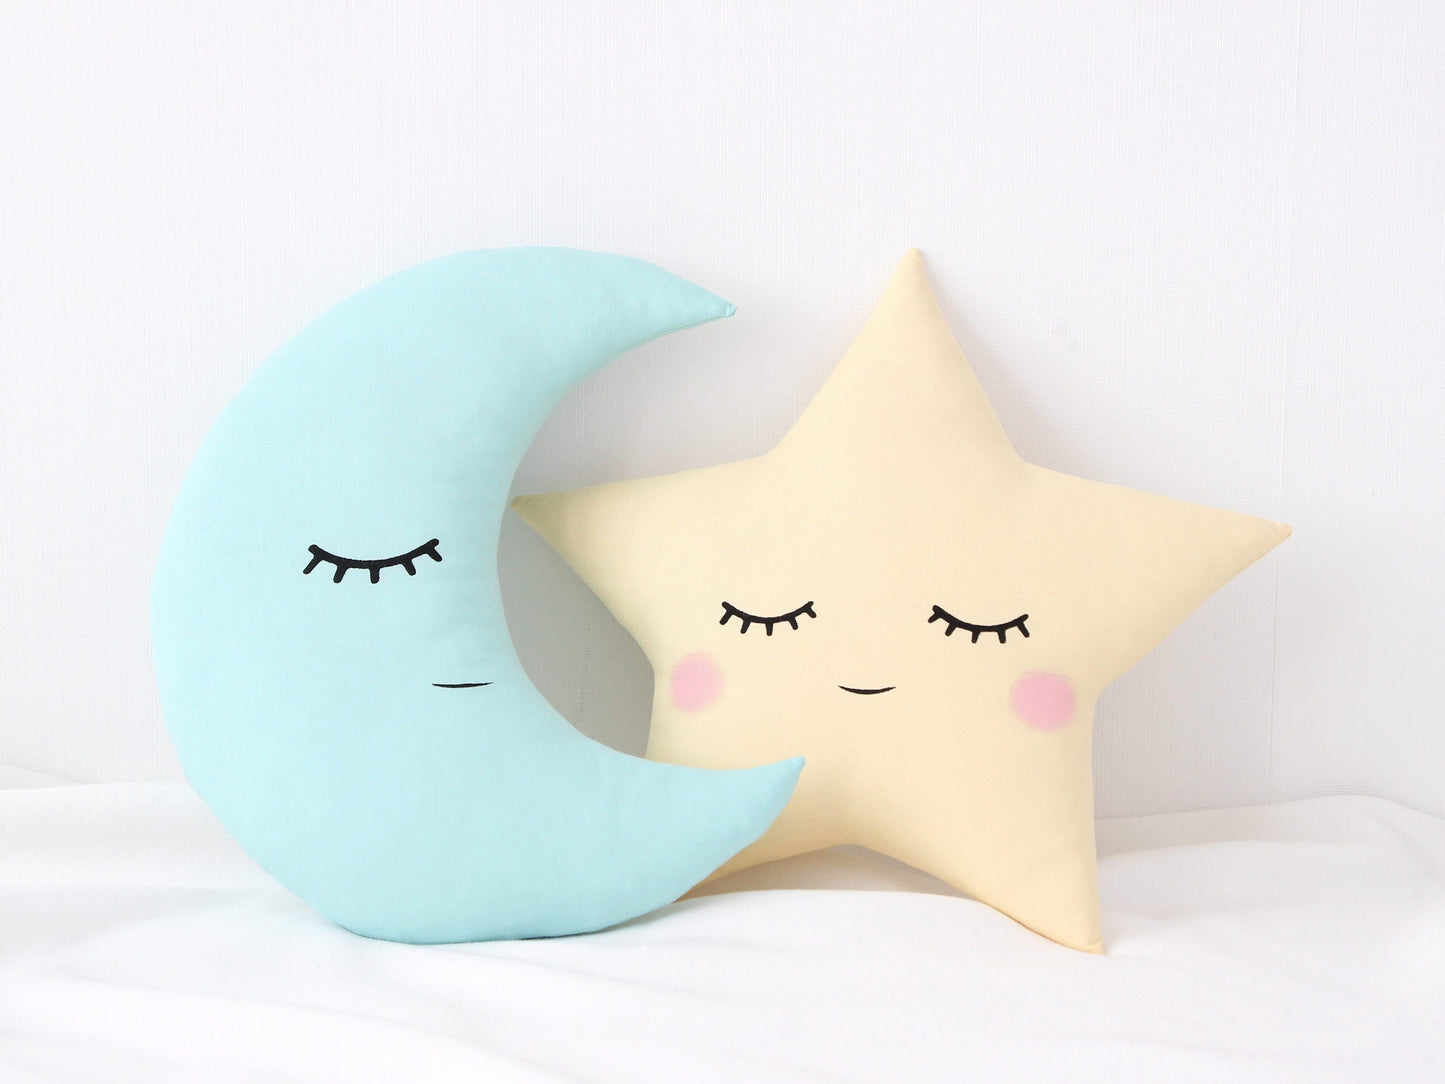 Mint Crescent Moon Pillow with Crown or Star